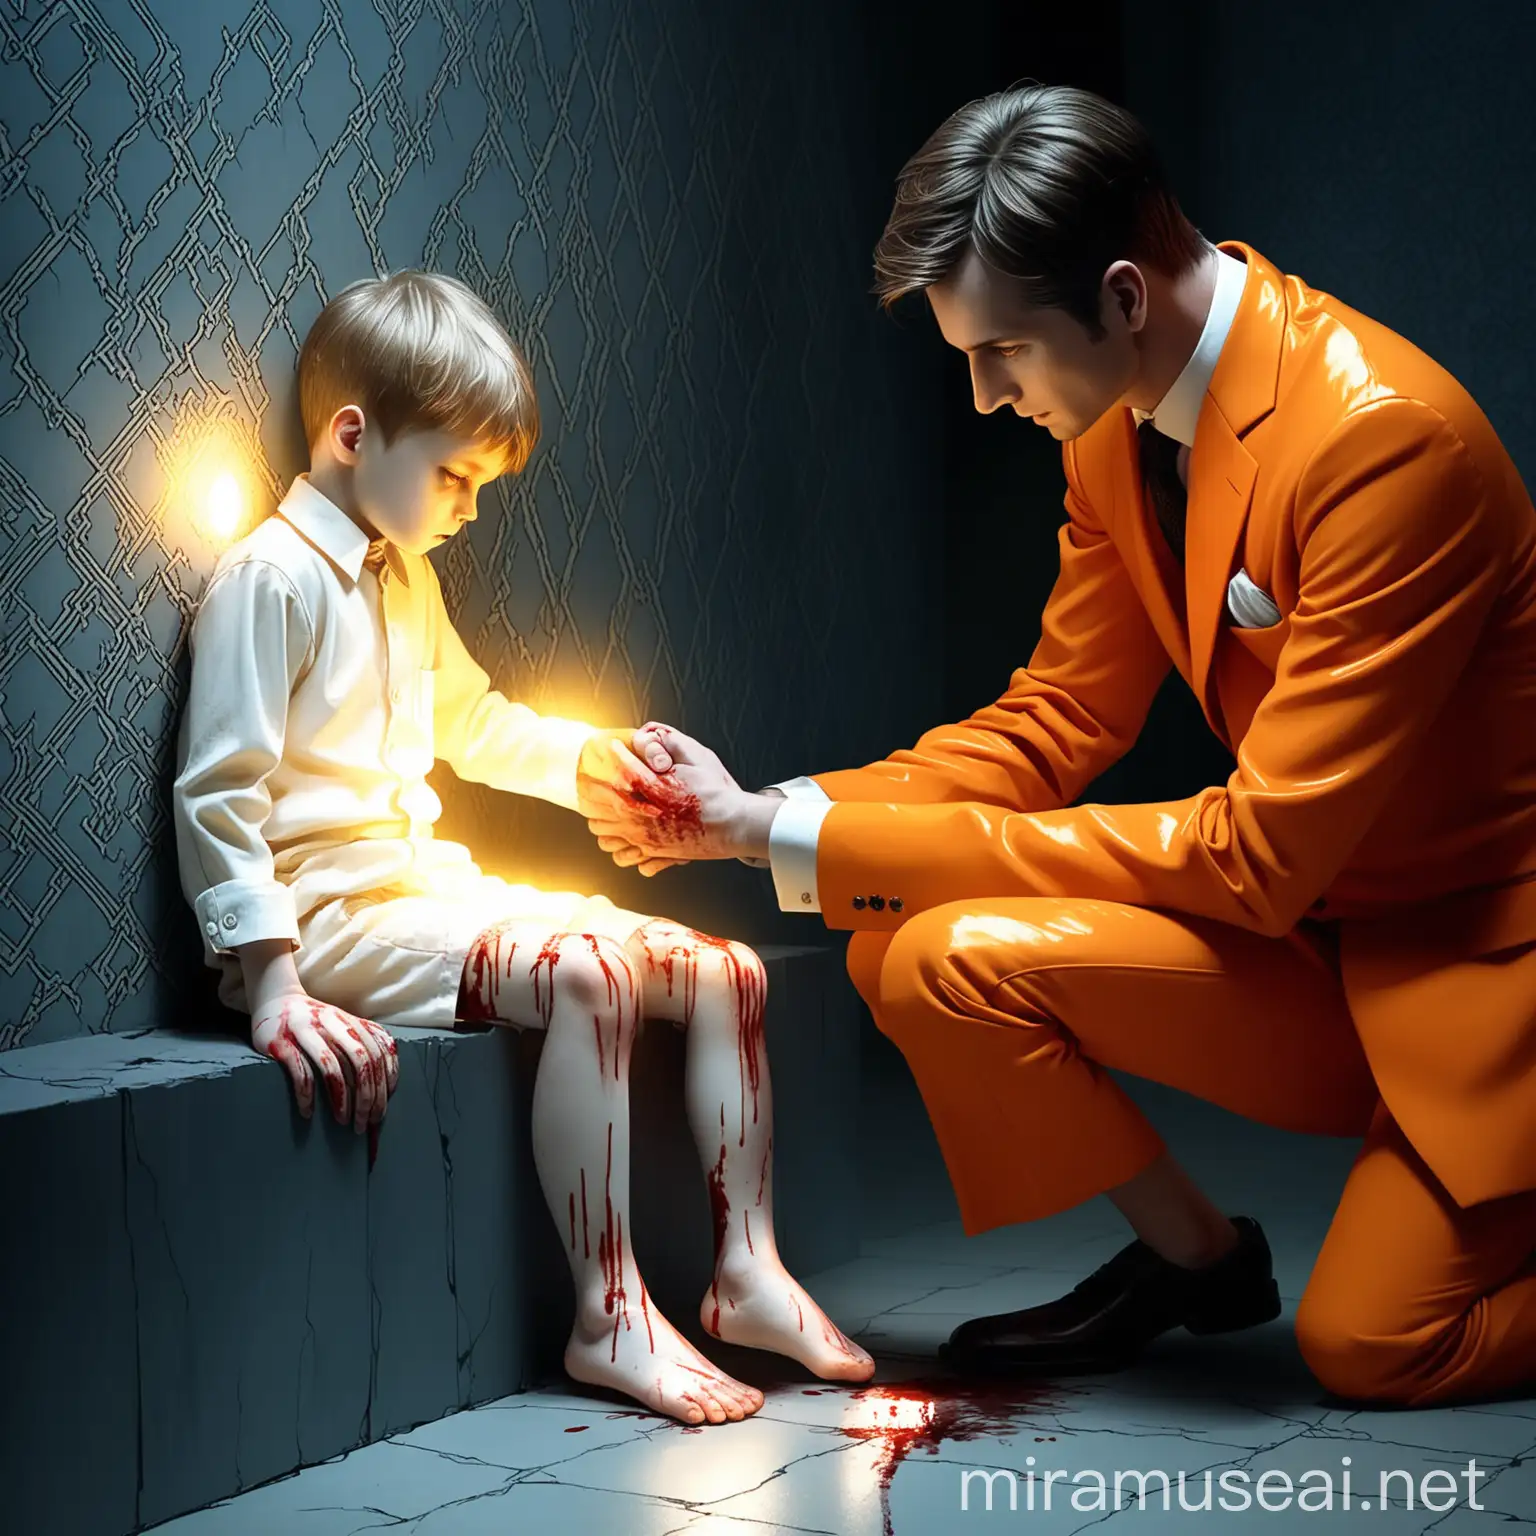 The background is a secret room with 'enochian patterns' on it.nThe eight-year-old injured his knee and is bleeding profusely.nA handsome man in his 20s in an orange suit puts his hand on the knee of an eight-year-old child.nAn intense white glow emanates from the knee.